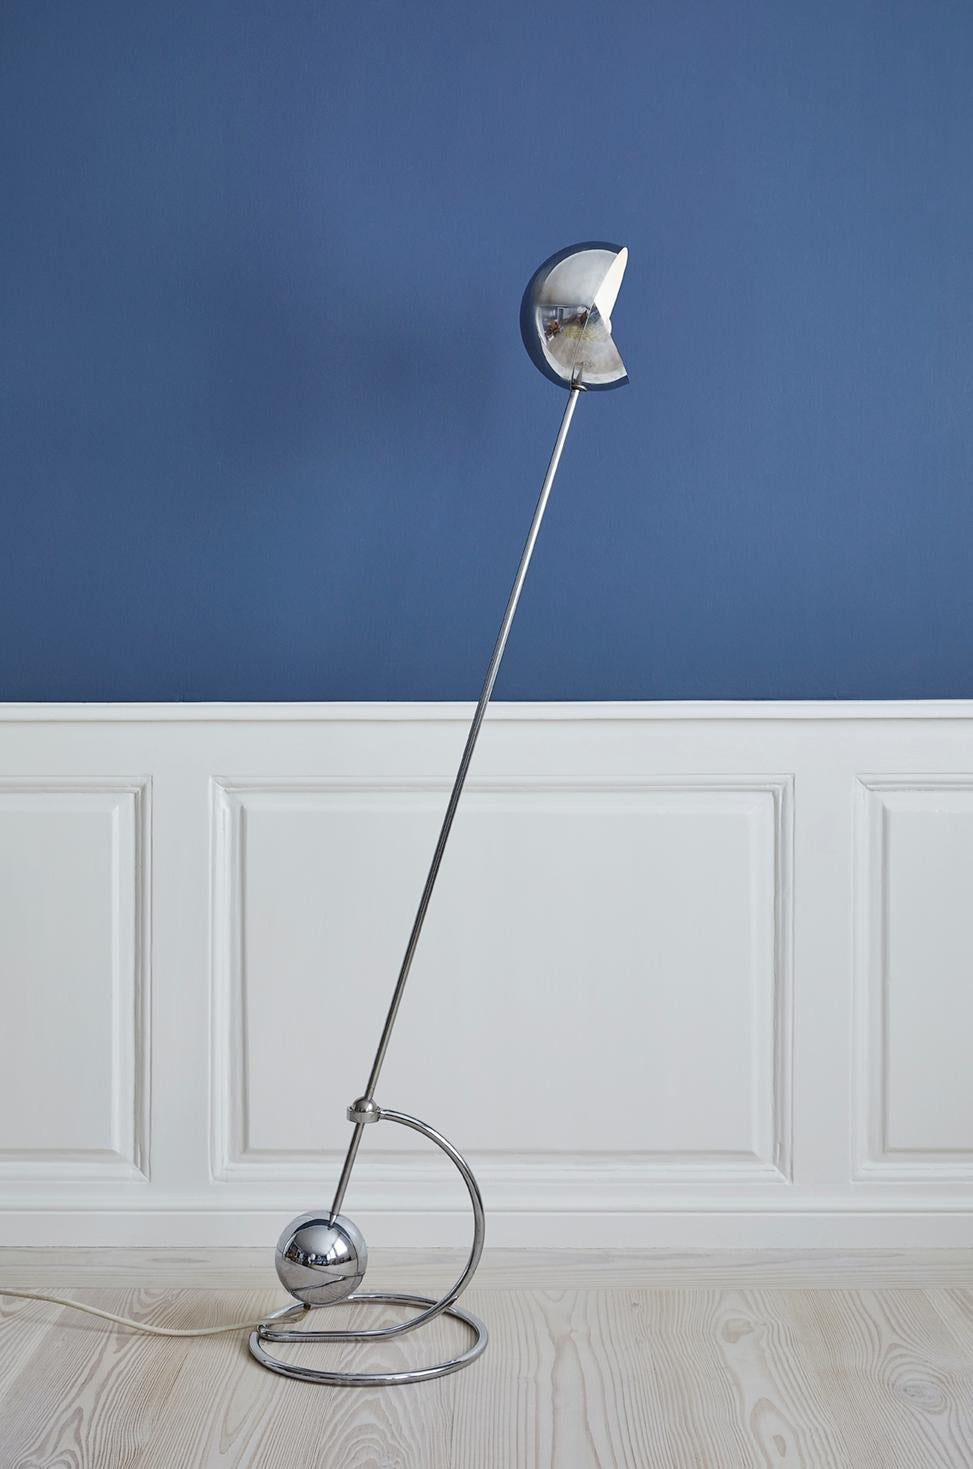 Paolo Tilche
Italy, 1970s

A rare adjustable floor lamp ‘3S’ in chrome-plated metal. Designed by Paolo Tilche in 1972 and produced by Sirrah, Bologna. 

The large, chrome-plated metal counter weight keeps the long arm perfectly balanced in the